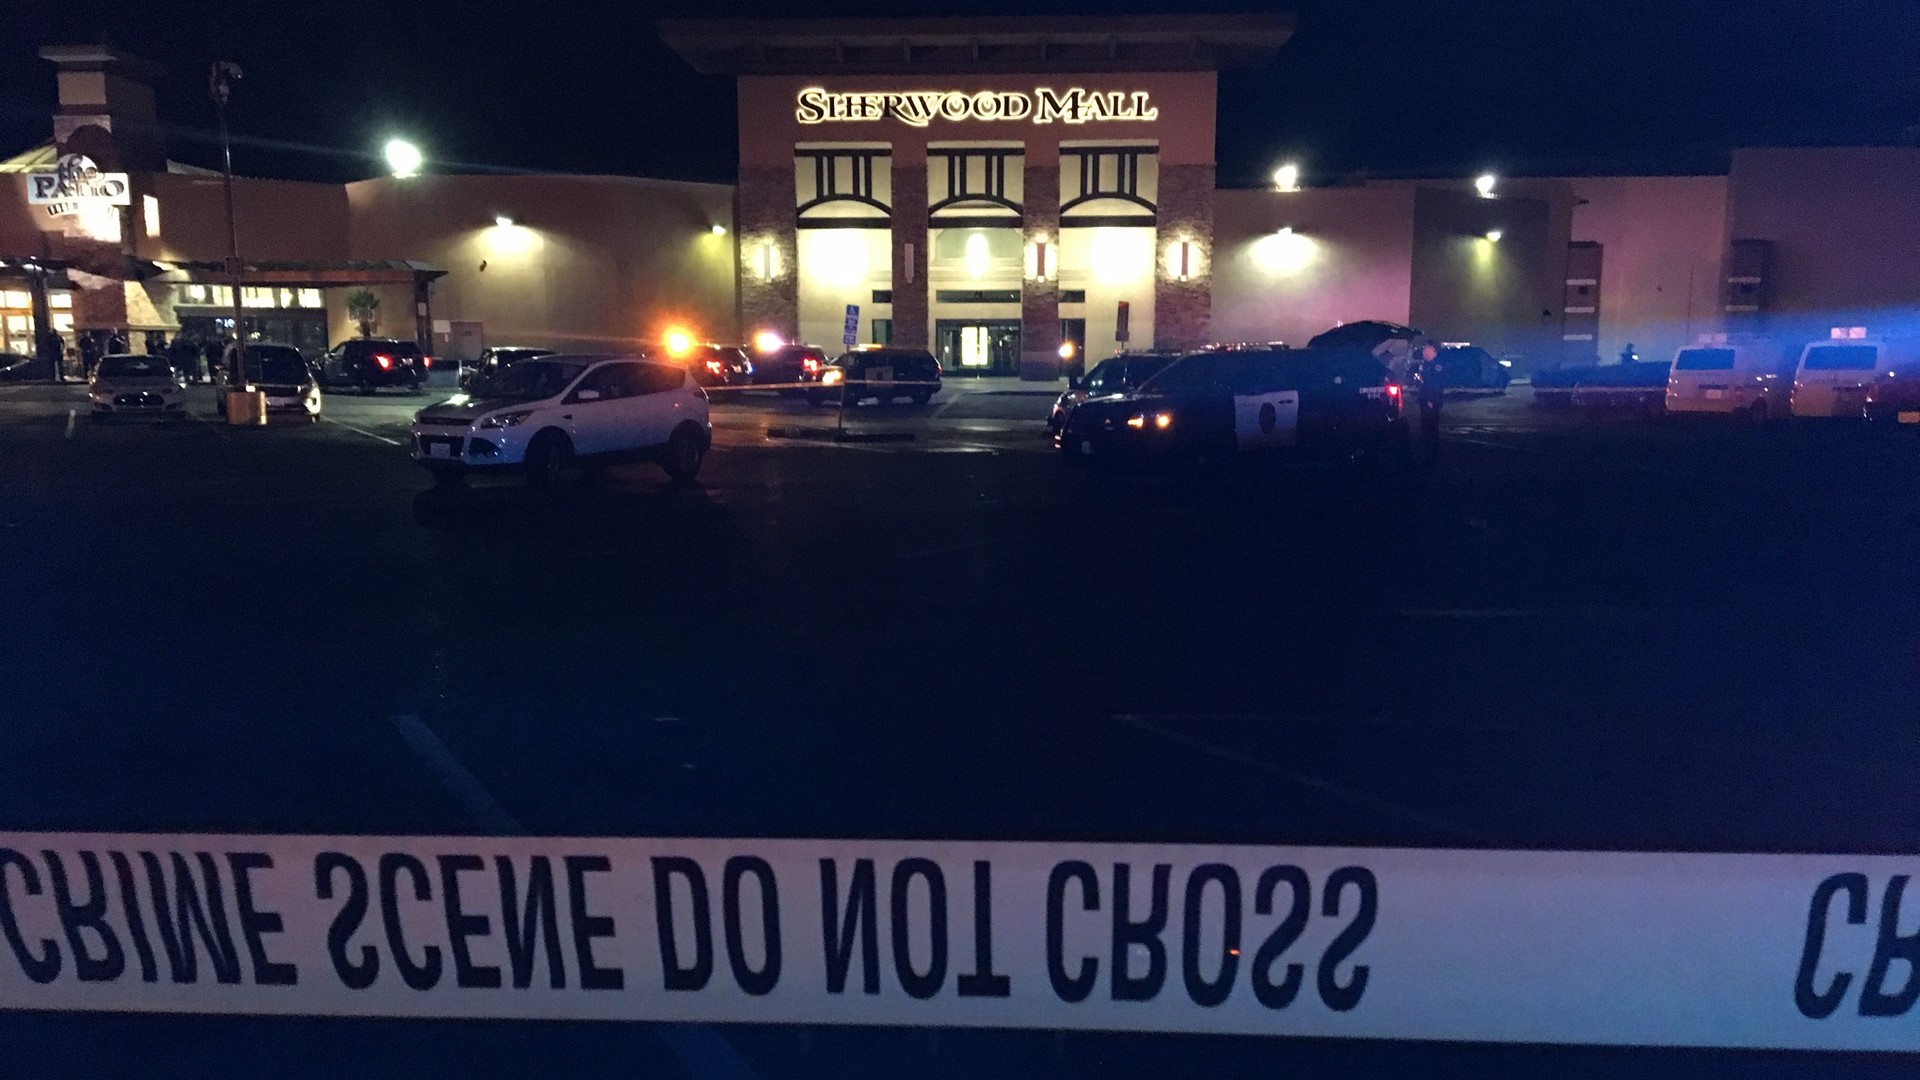 One person is dead after a shooting at a Stockton mall. Stockton police say the shooting happened around 8:40 p.m. at Sherwood Mall.